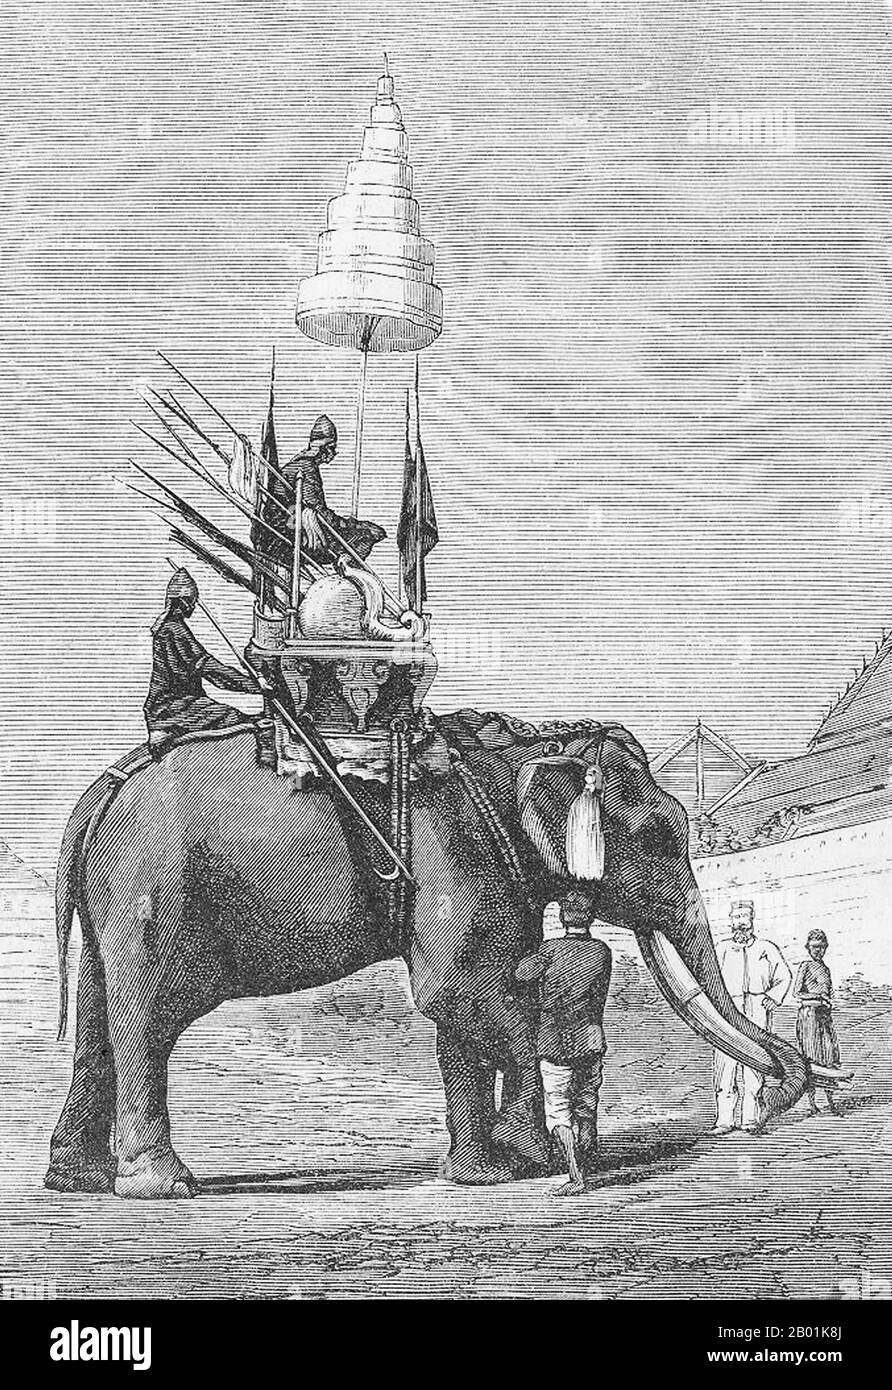 Thailand: A Siamese war elephant equipped for battle. Engraving, 19th century.  A war elephant was an elephant trained and guided by humans for combat. Their main use was to charge the enemy, trampling them and breaking their ranks. A division of war elephants is known as elephantry.  They were probably first employed in India, the practice spreading out across Southeast Asia and westwards into the Mediterranean. Their most famous use in the West was by the Greek general Pyrrhus of Epirus and in great numbers by the armies of Carthage, especially under Hannibal.  War Elephants were Stock Photo